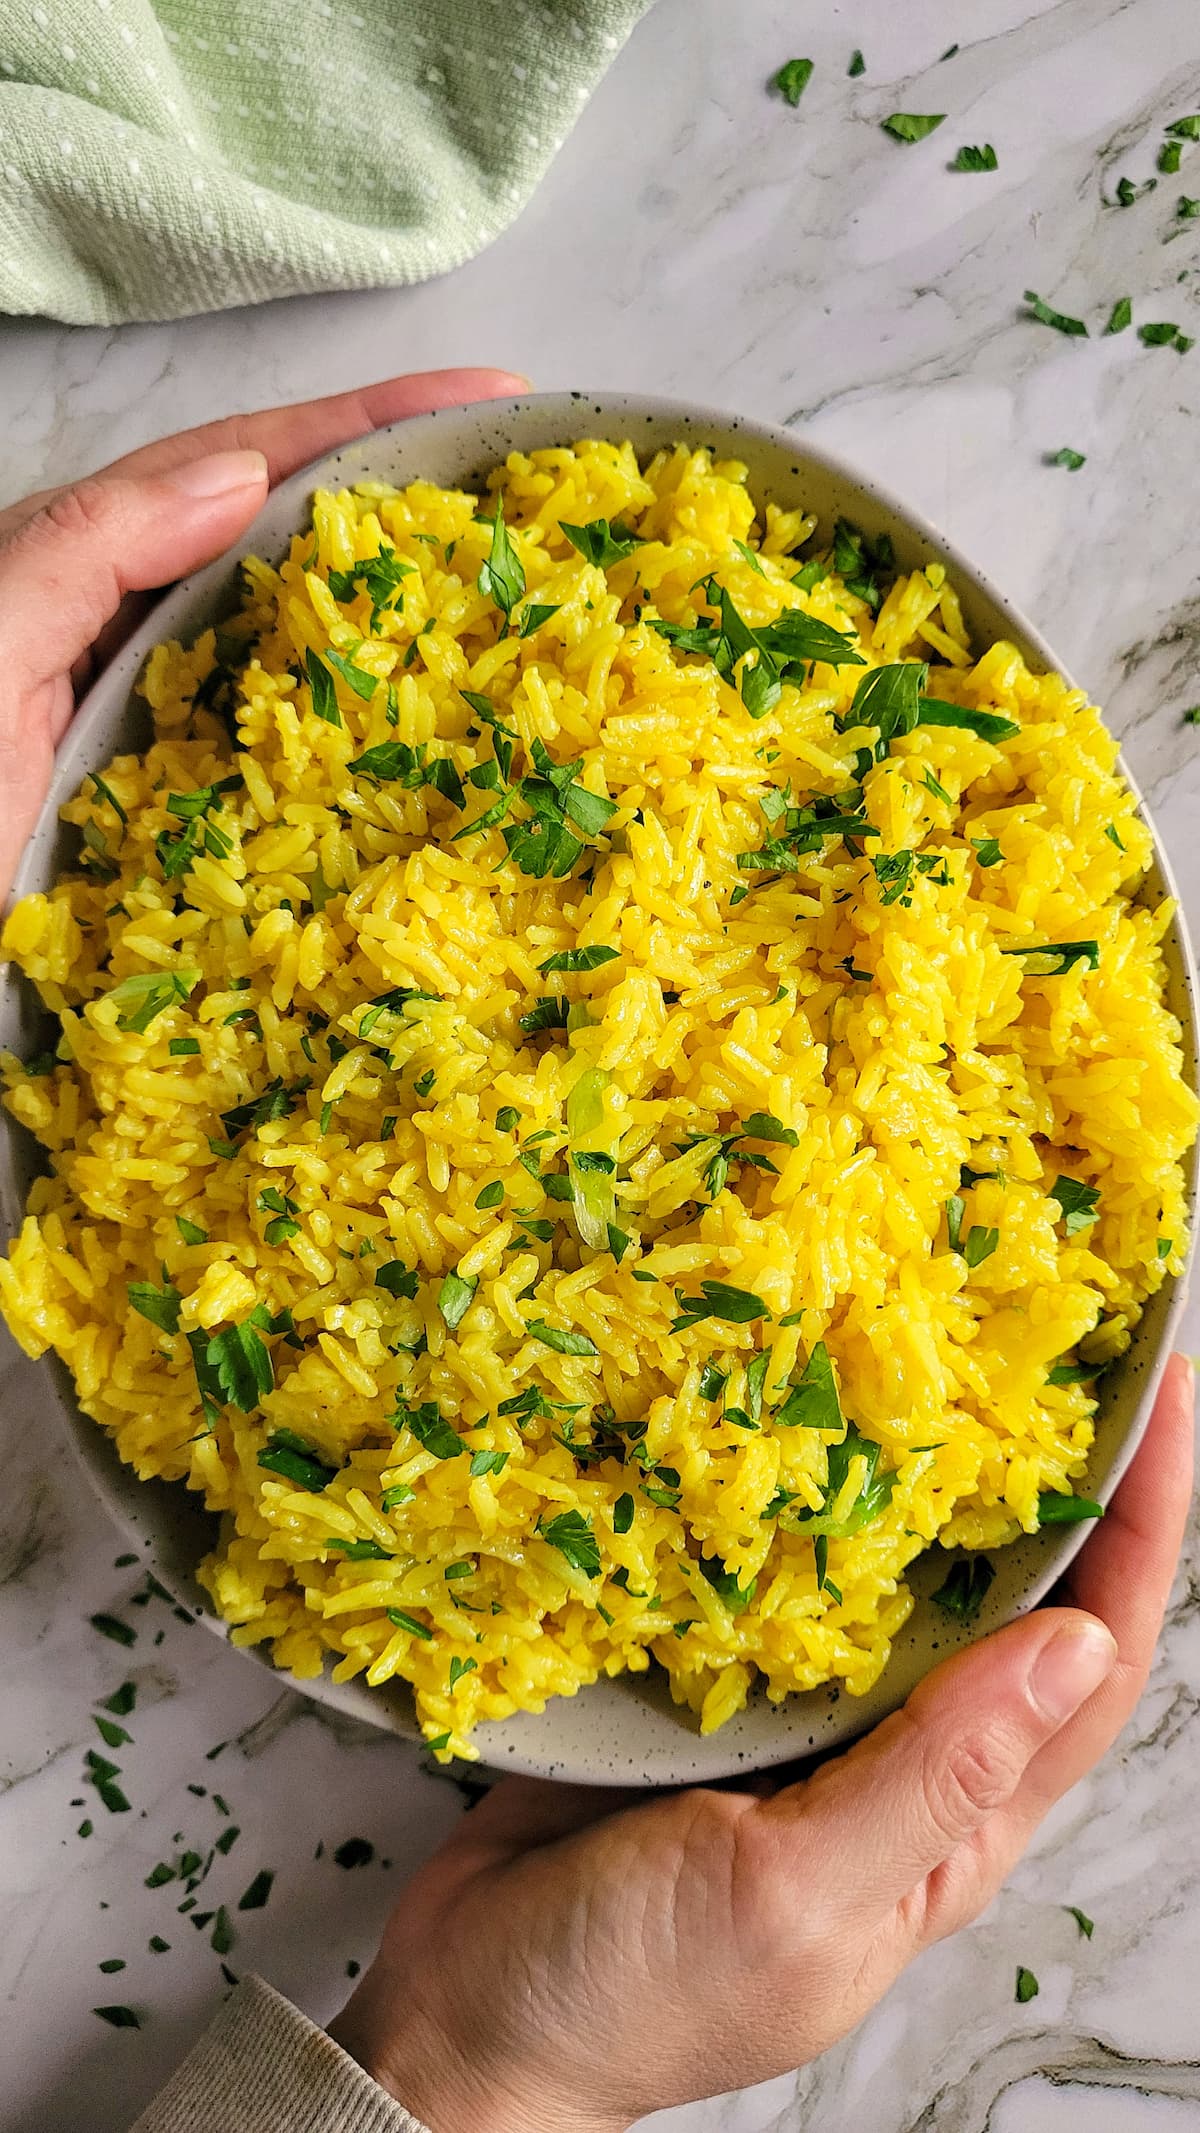 hands holding a bowl of turmeric rice garnished with parsley and green onions